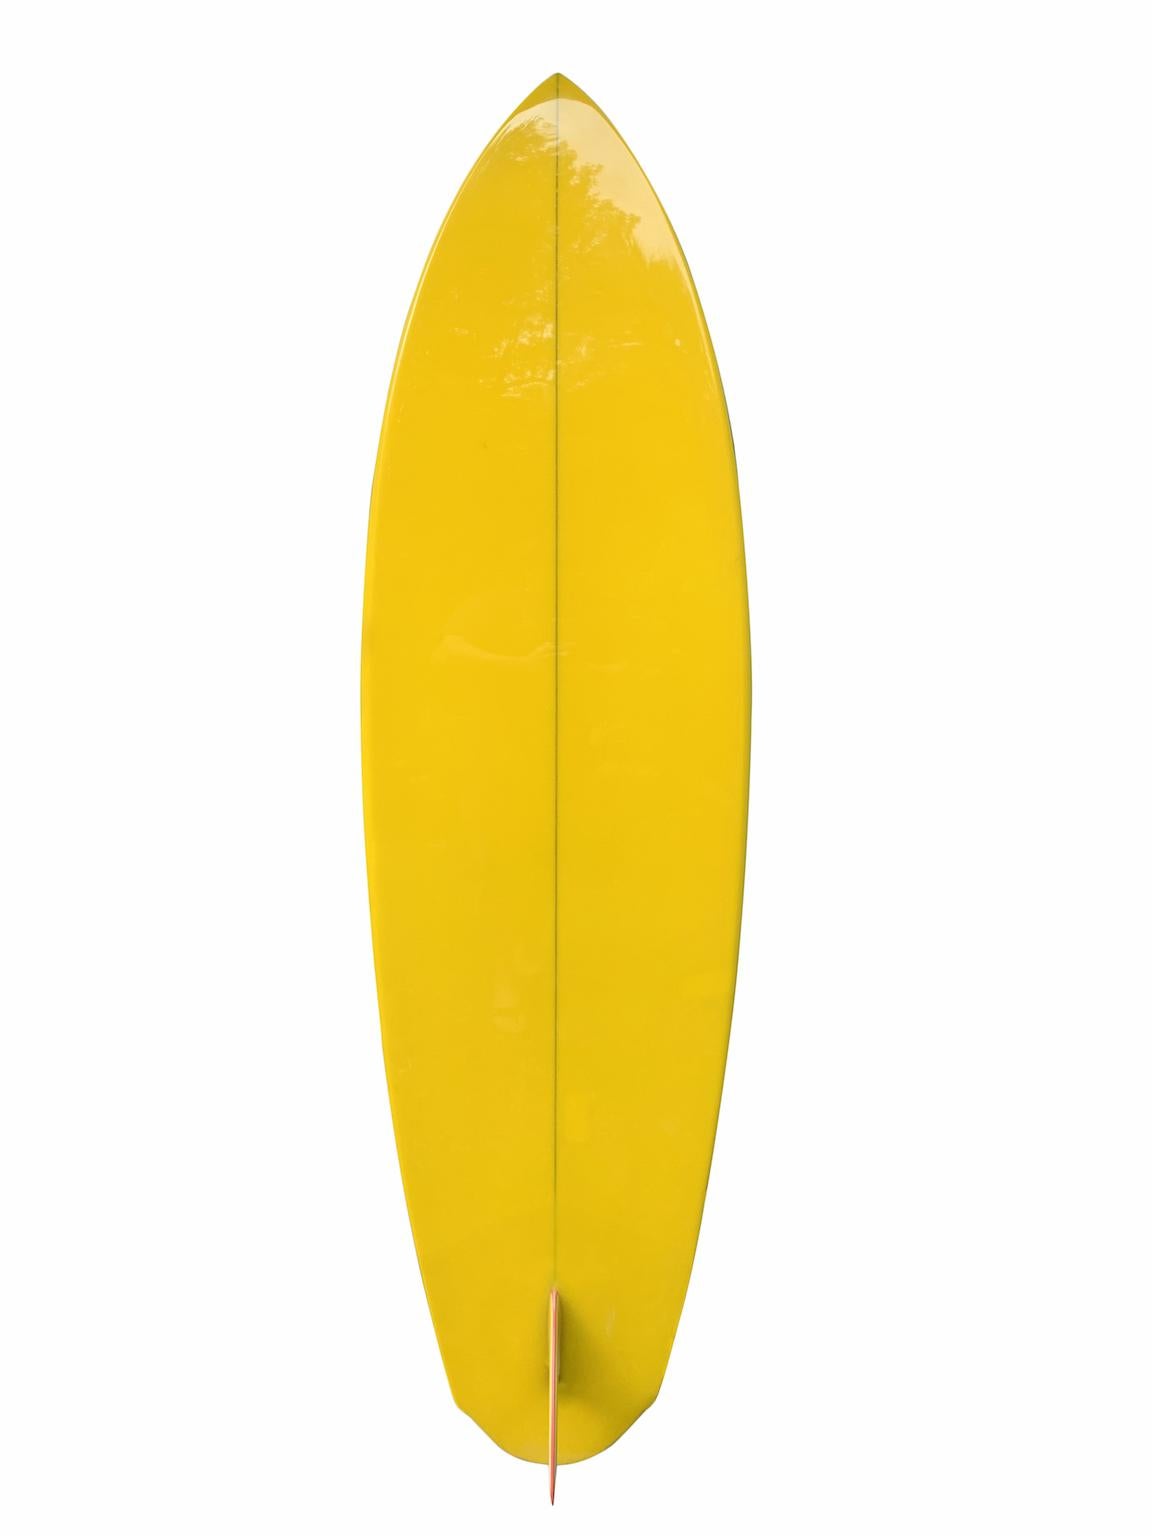 Early 1970s Dick Brewer shaped single fin surfboard. Features a beautiful yellow tint with tri-color glassed on single fin and black pinstriping. Restored to it's original condition by a surfboard restoration expert with over 40 years of experience.